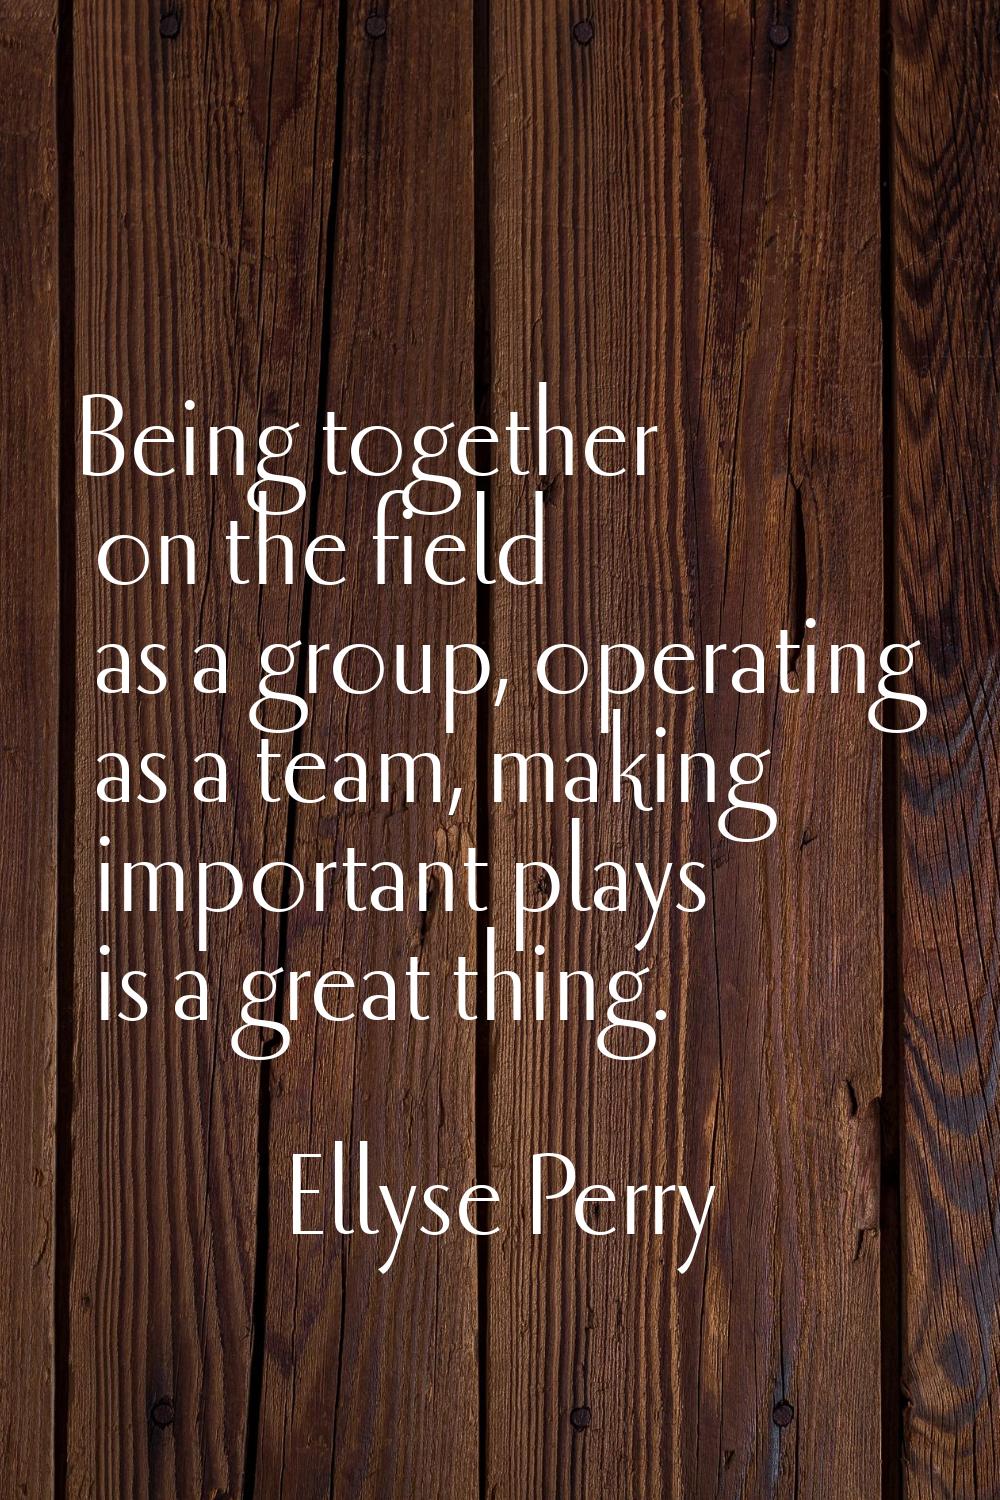 Being together on the field as a group, operating as a team, making important plays is a great thin